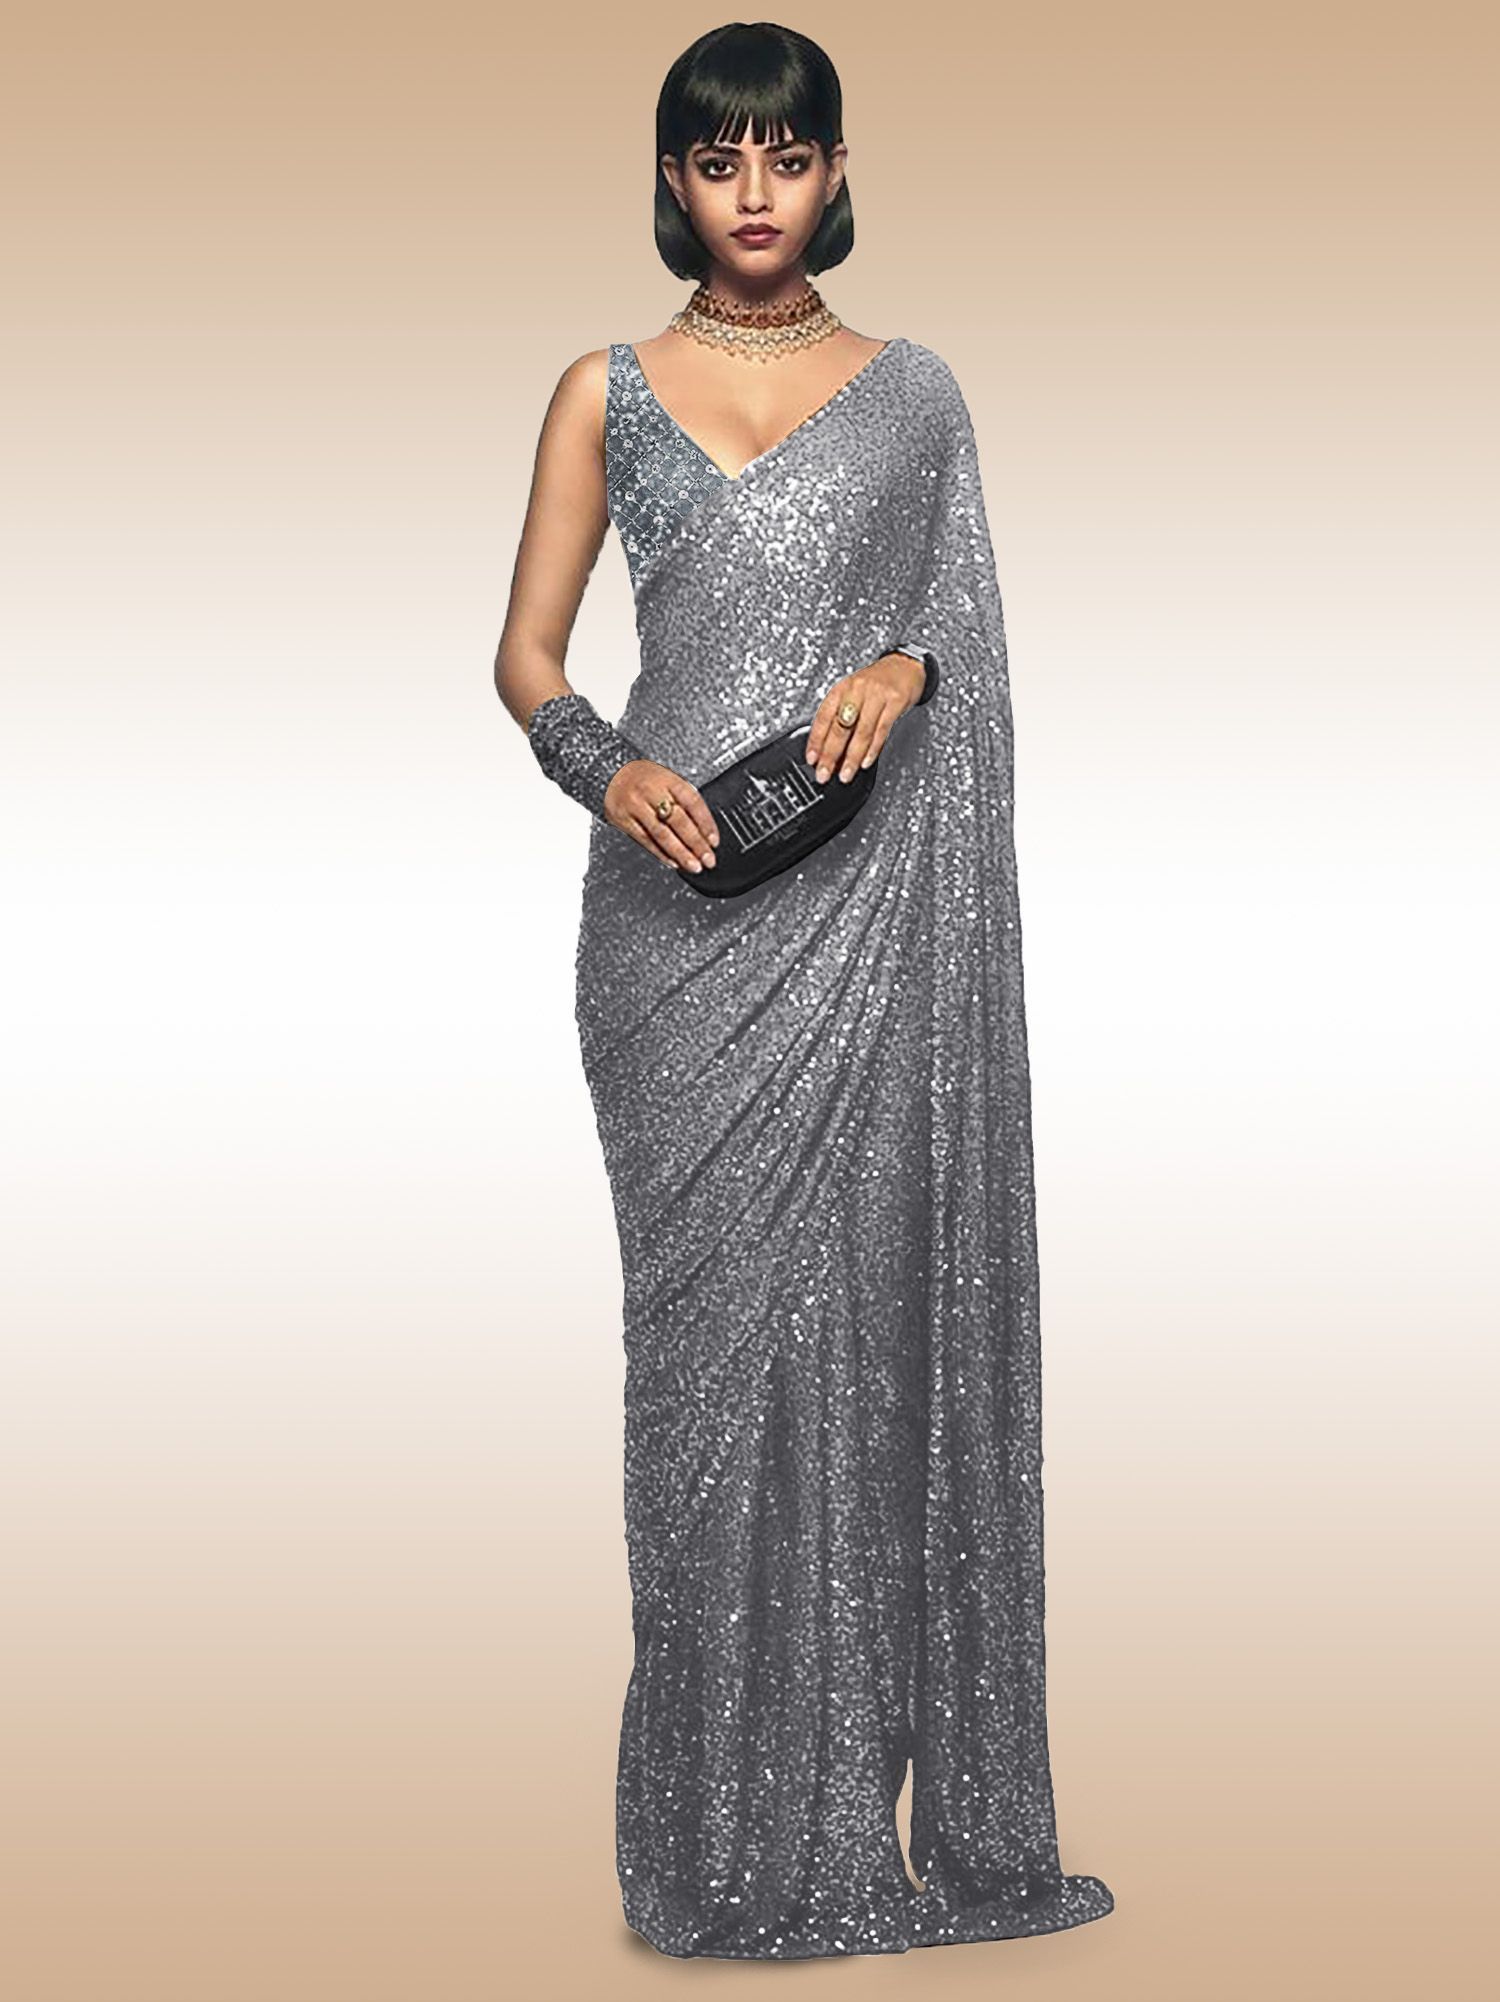 Mirror Embellished Grey Saree With Blouse 4357SR11